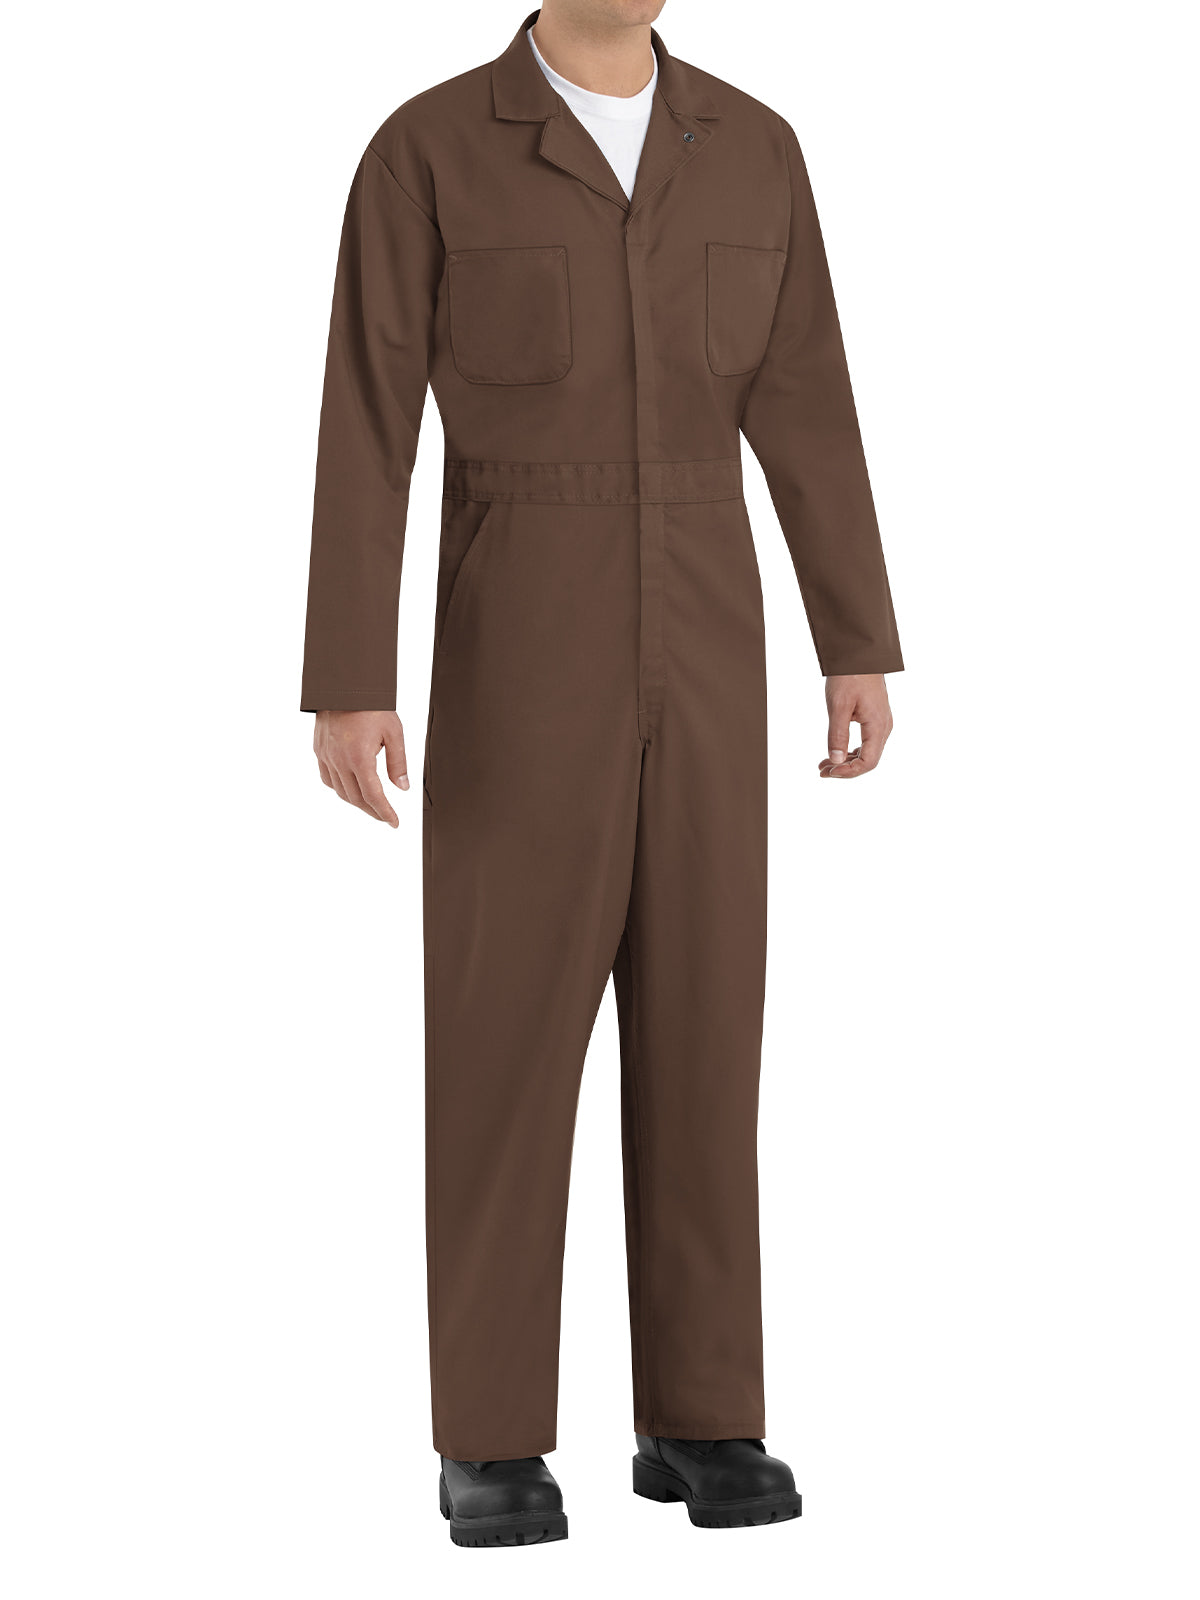 Men's Action Back Coverall - CT10 - Brown